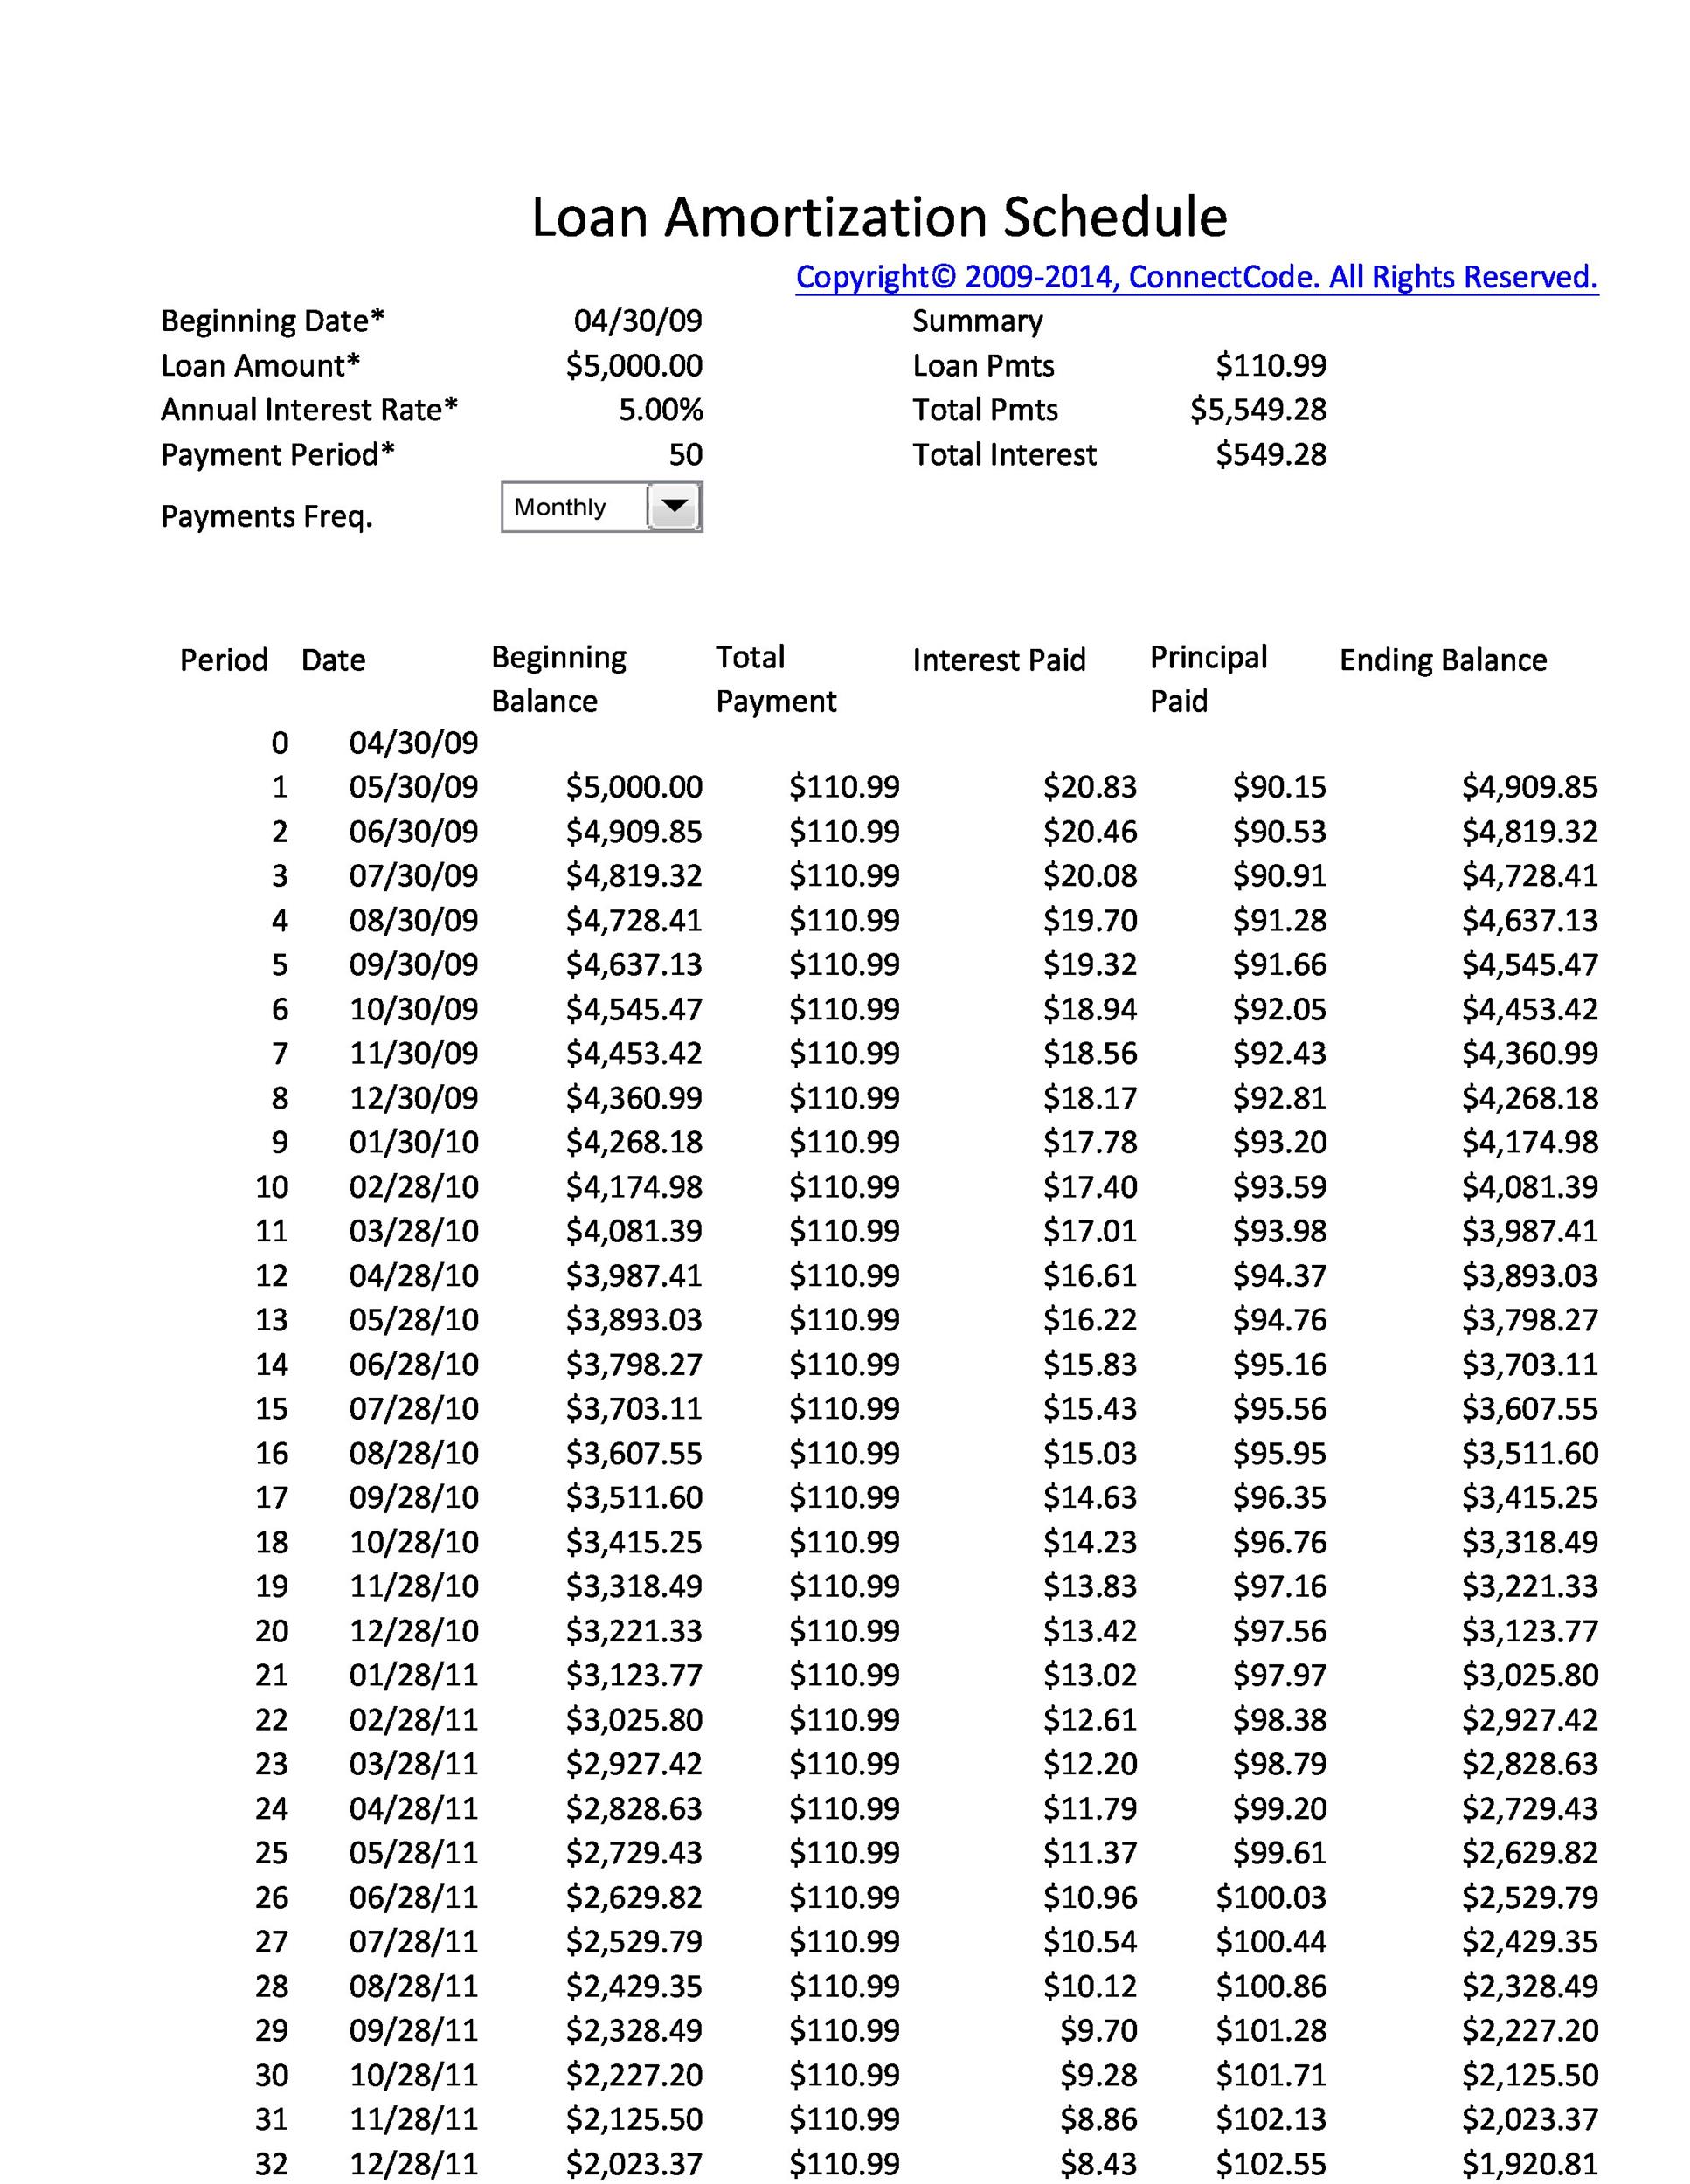  Amortization schedule with variable payments